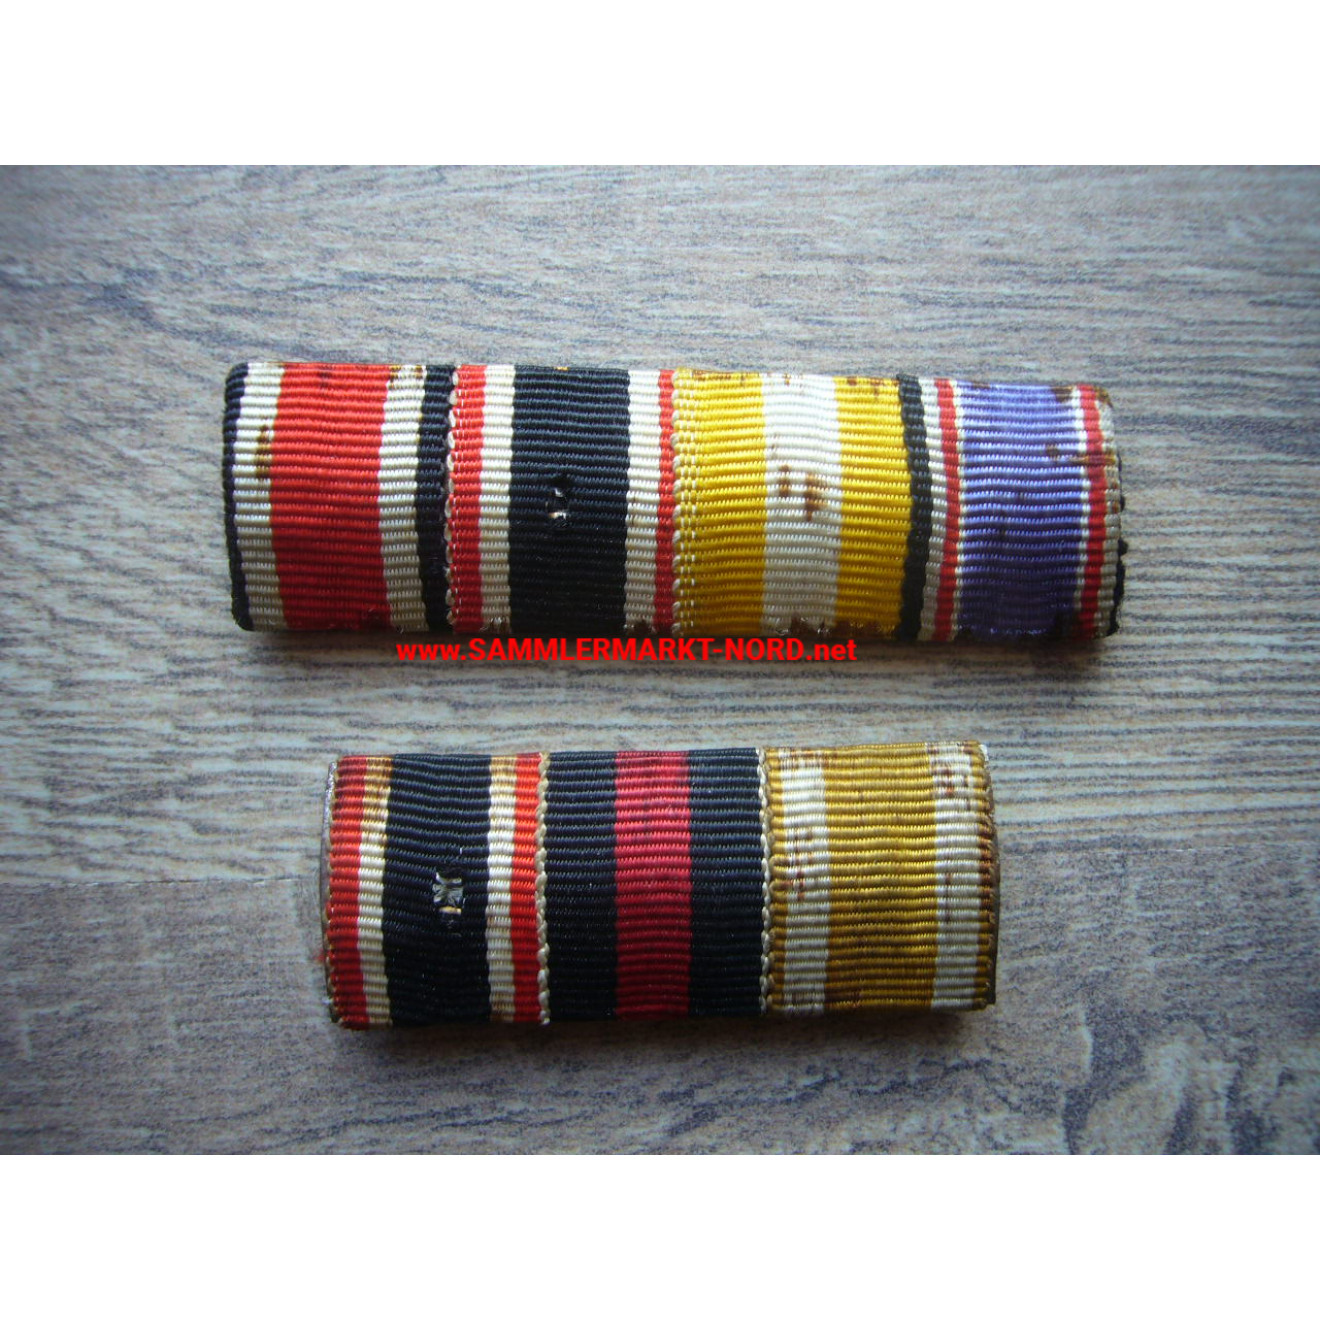 2 x Wehrmacht ribbon clasp